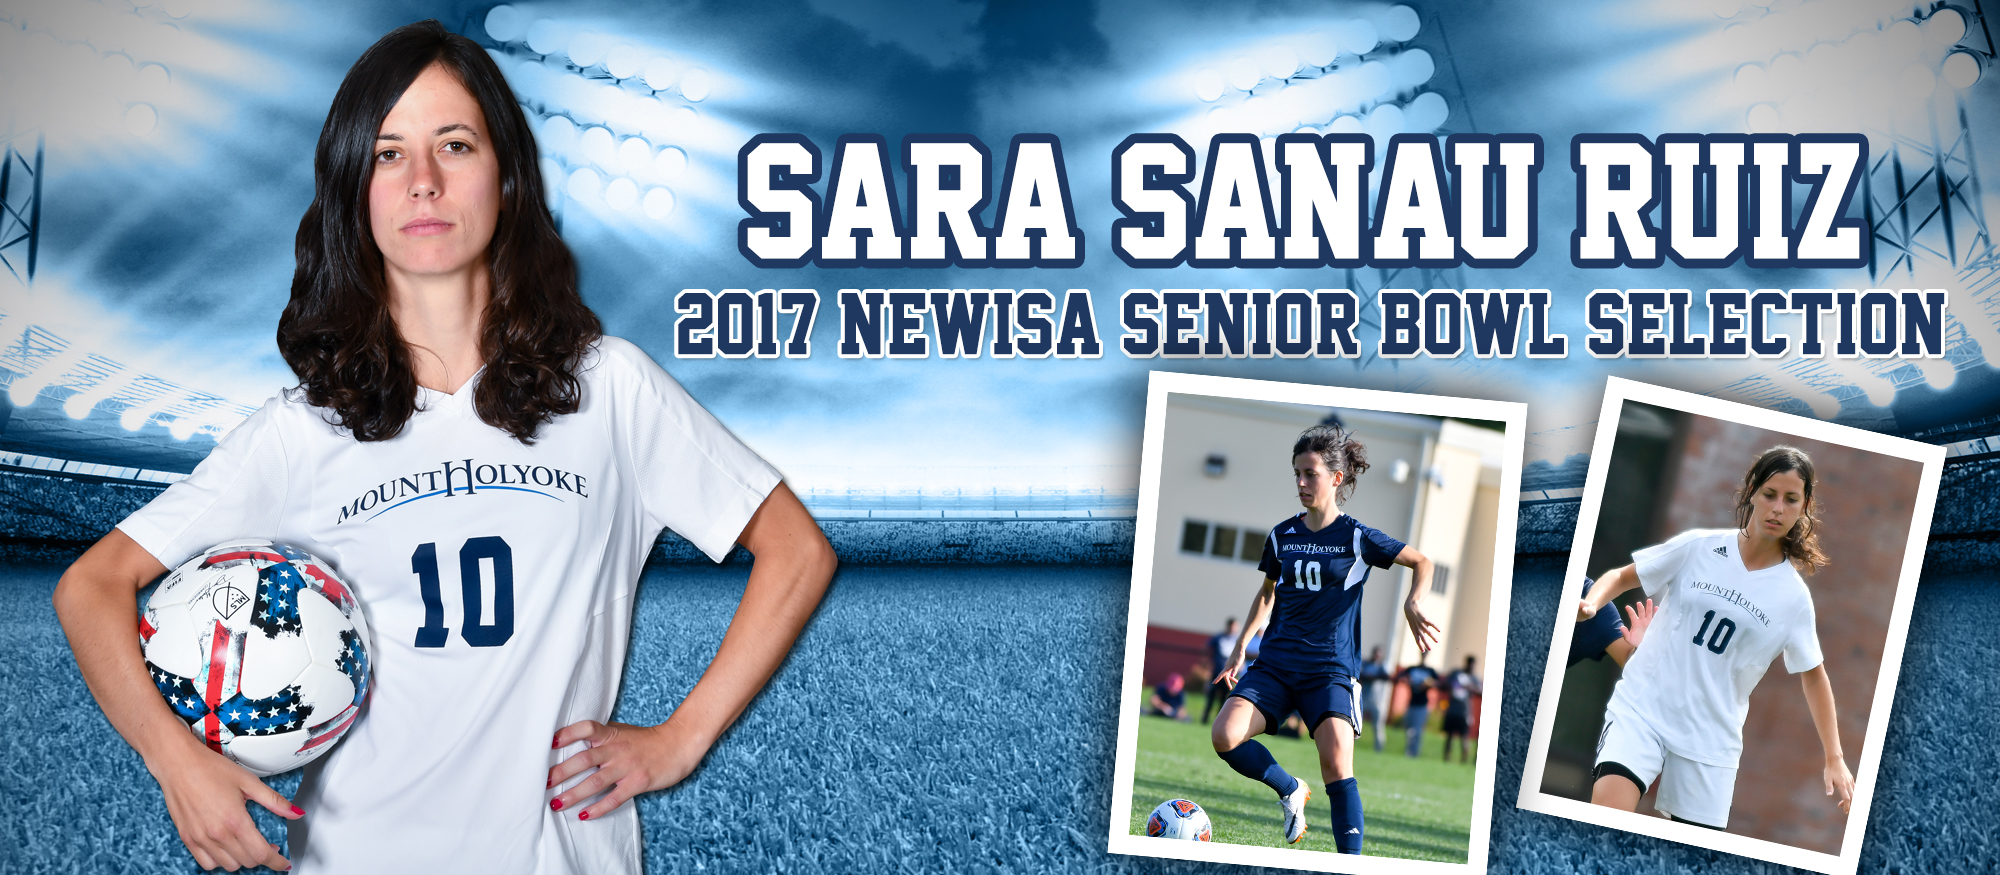 Graphic featuring Lyons soccer player, Sara Sanau Ruiz, who was selected to compete in the New England Women's Intercollegiate Soccer Association Senior Bowl on December 3rd.